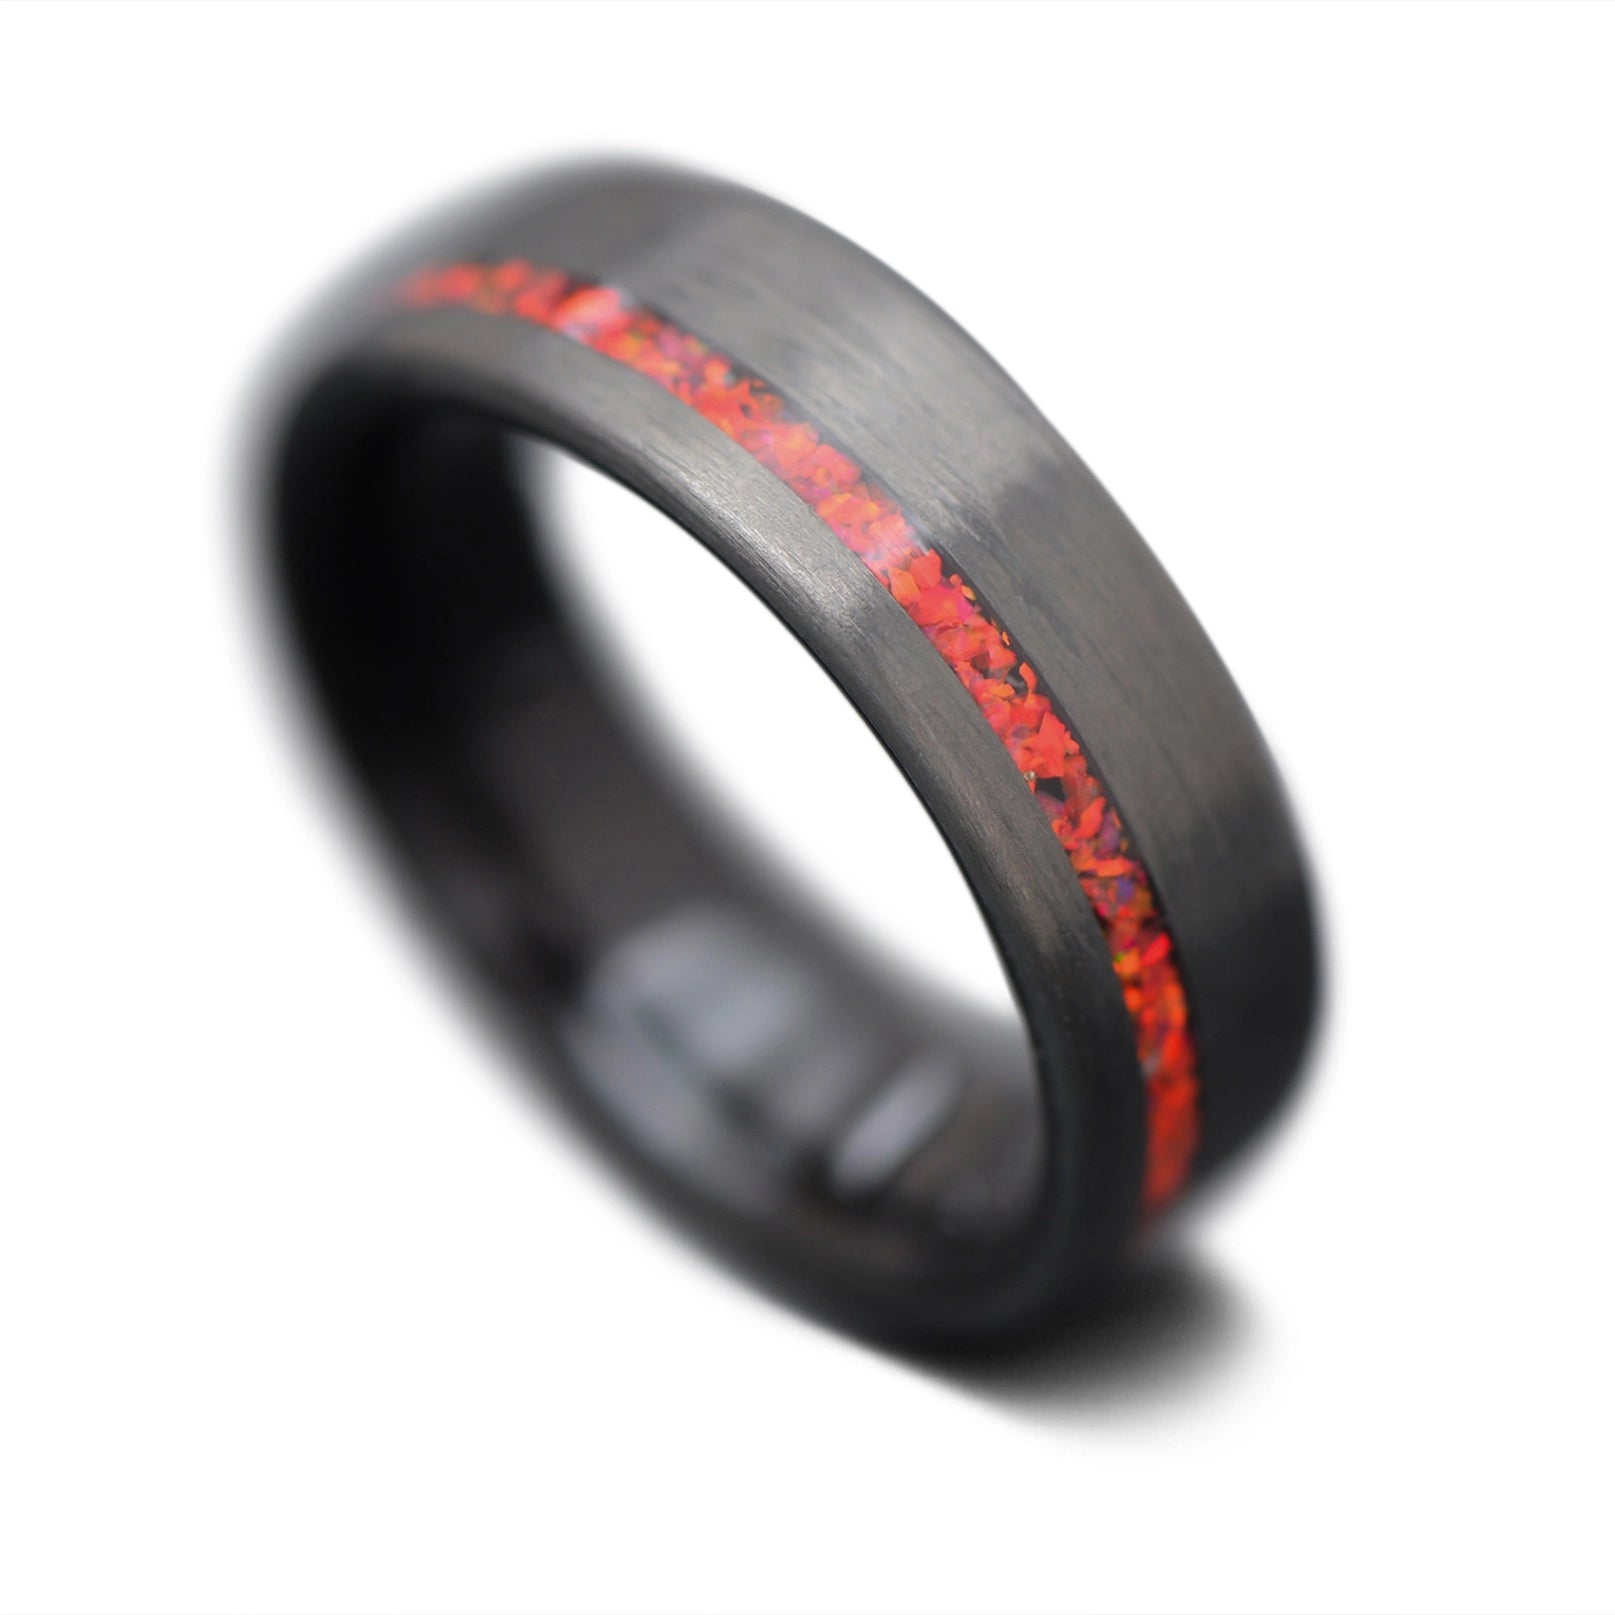 CarbonUni core ring with Ruby Fire Opal inlay and African Blackwood inner sleeve, 7mm -THE VERTEX